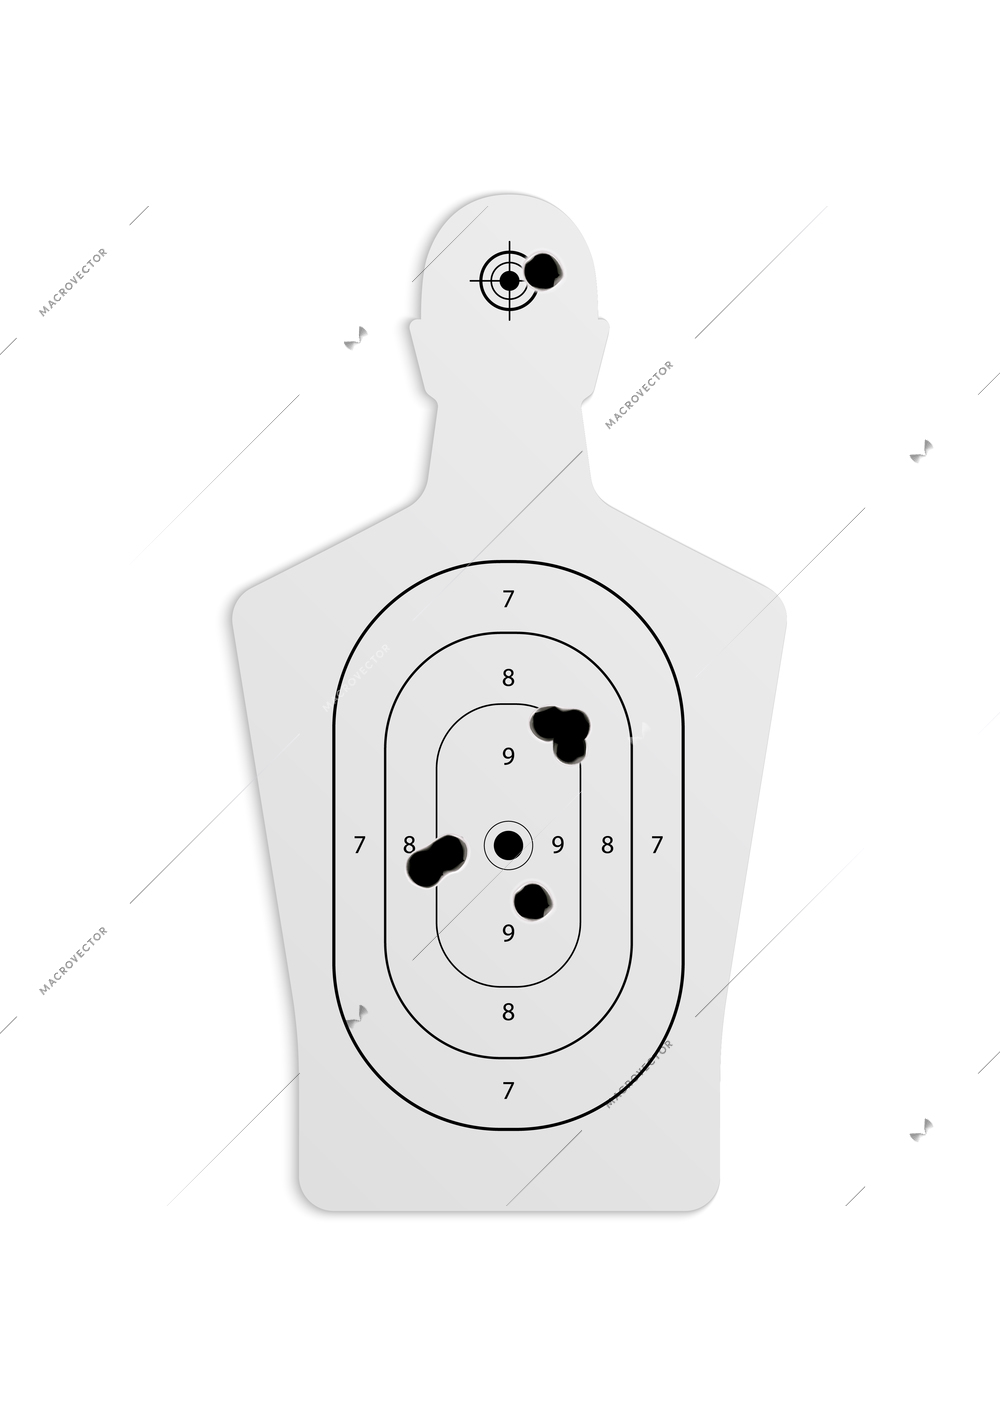 Bullet holes target realistic composition on blank background with isolated images of paper target with holes vector illustration